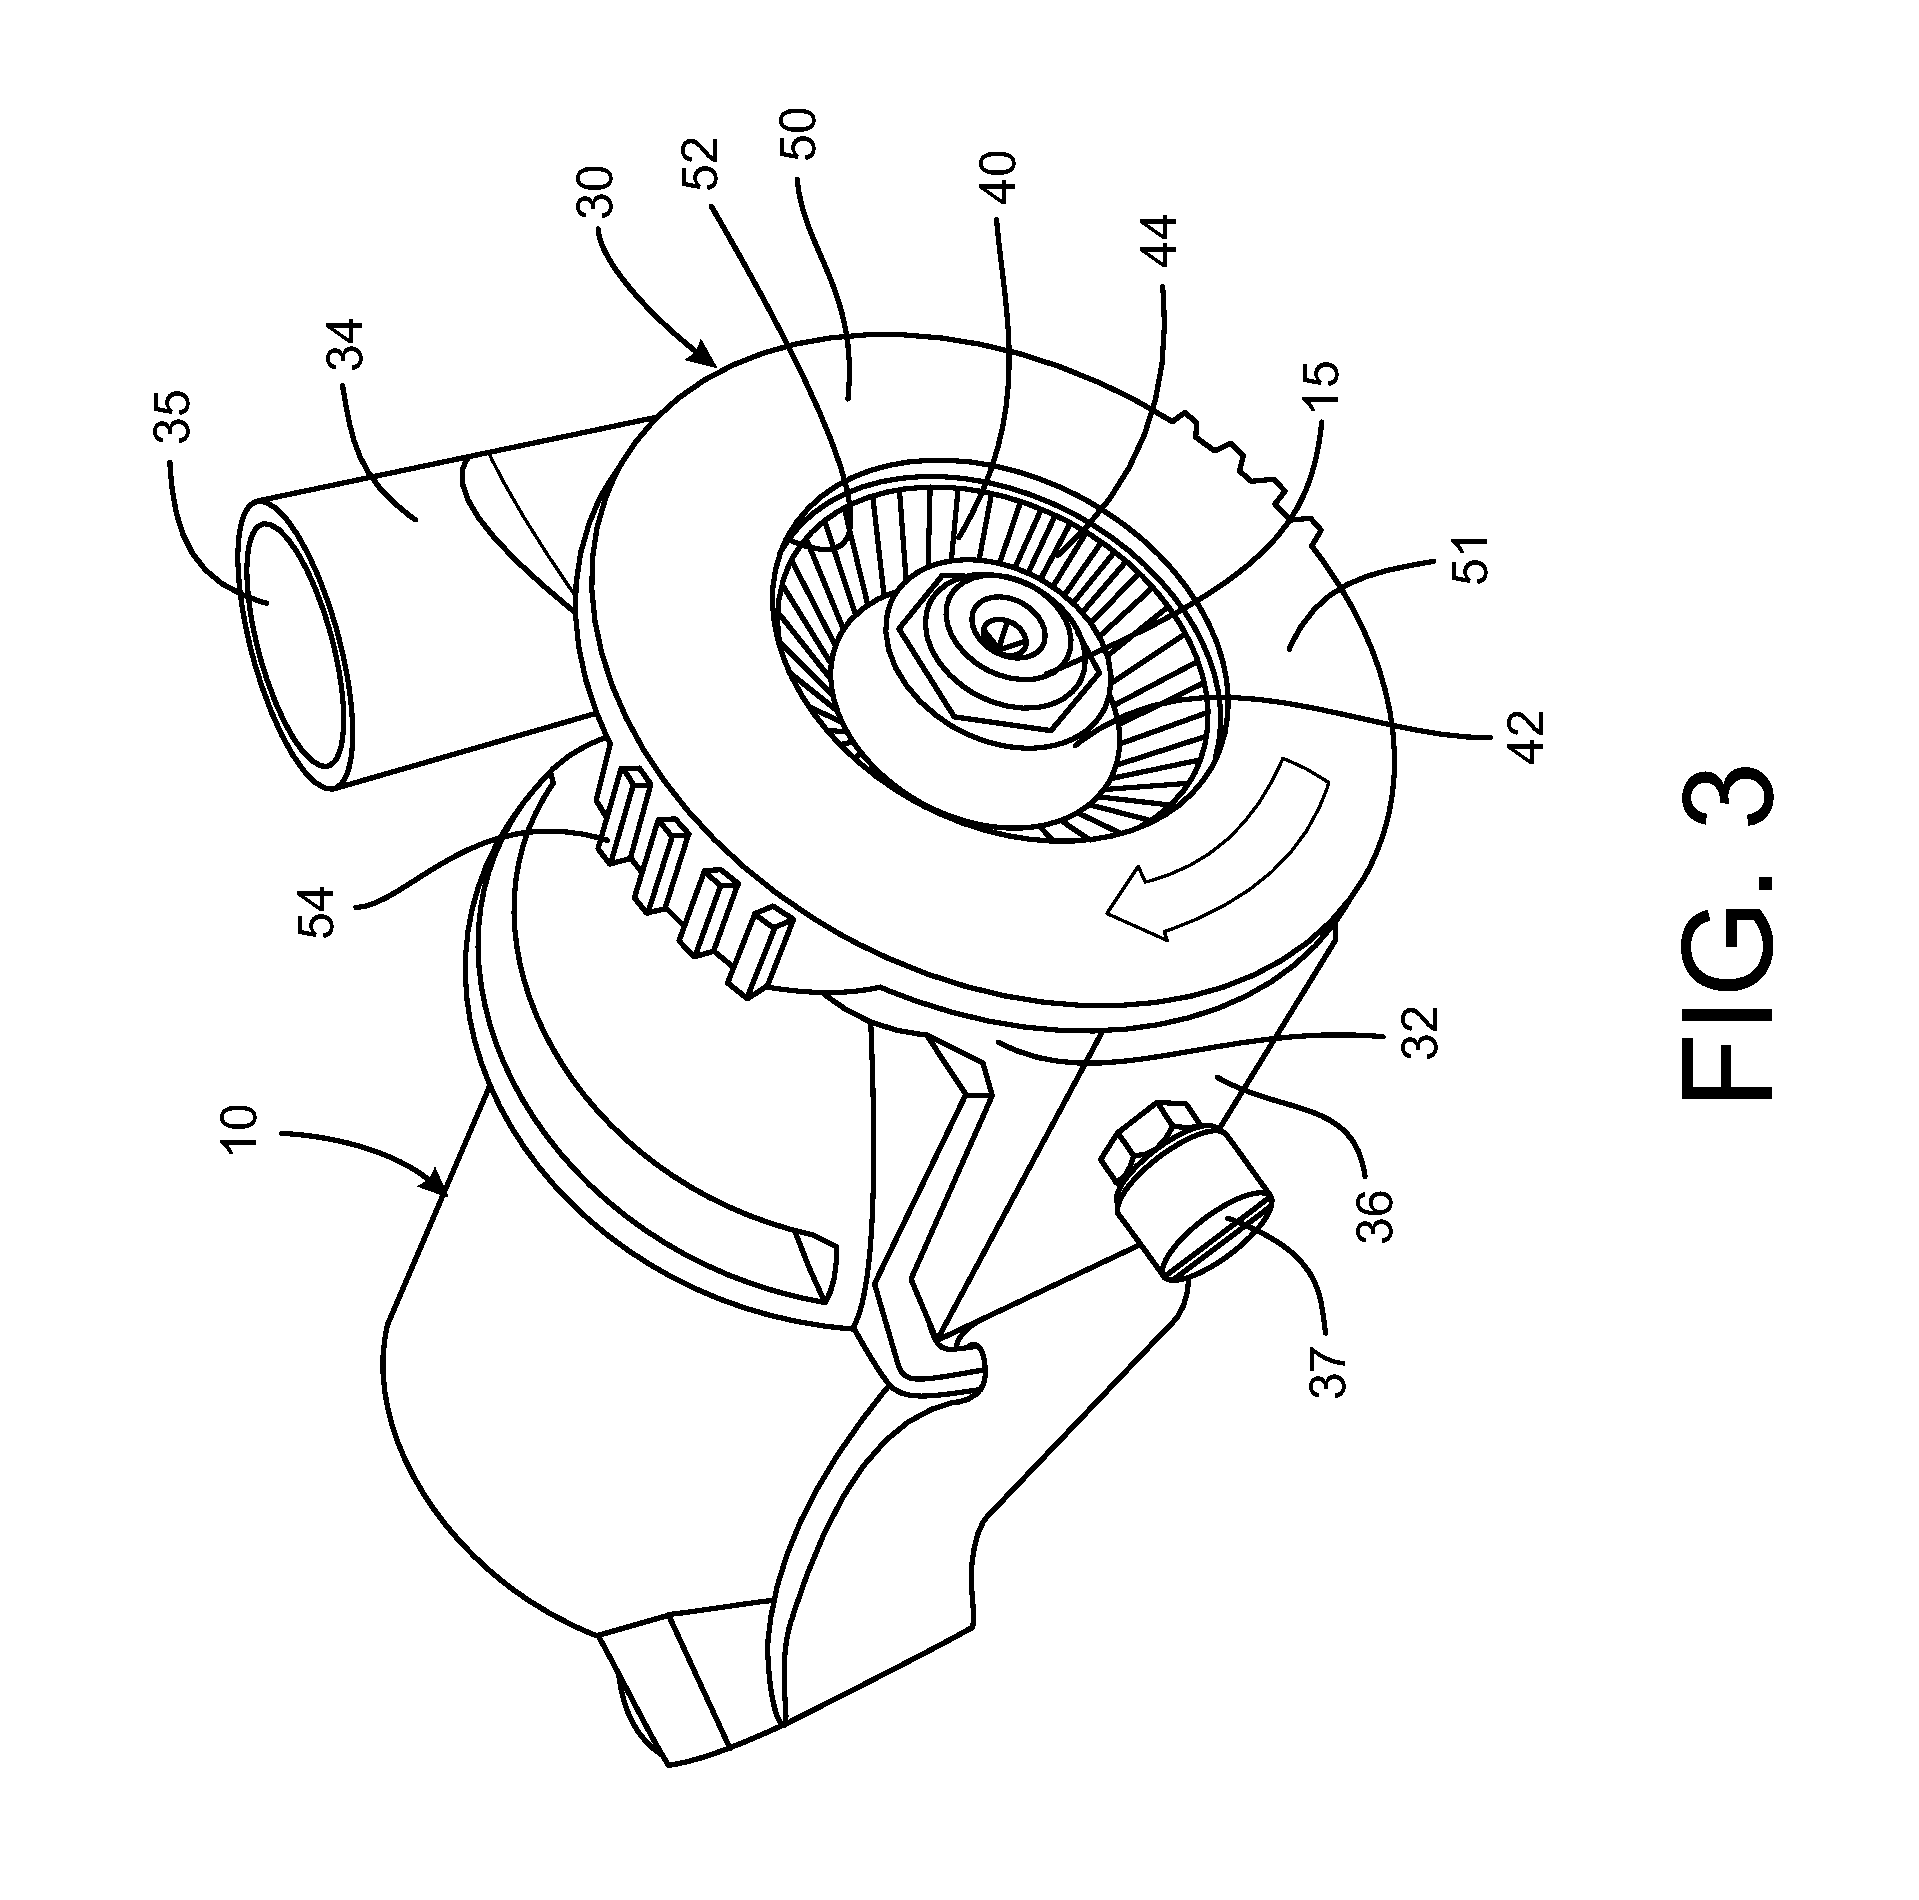 Dust extraction system for a power tool